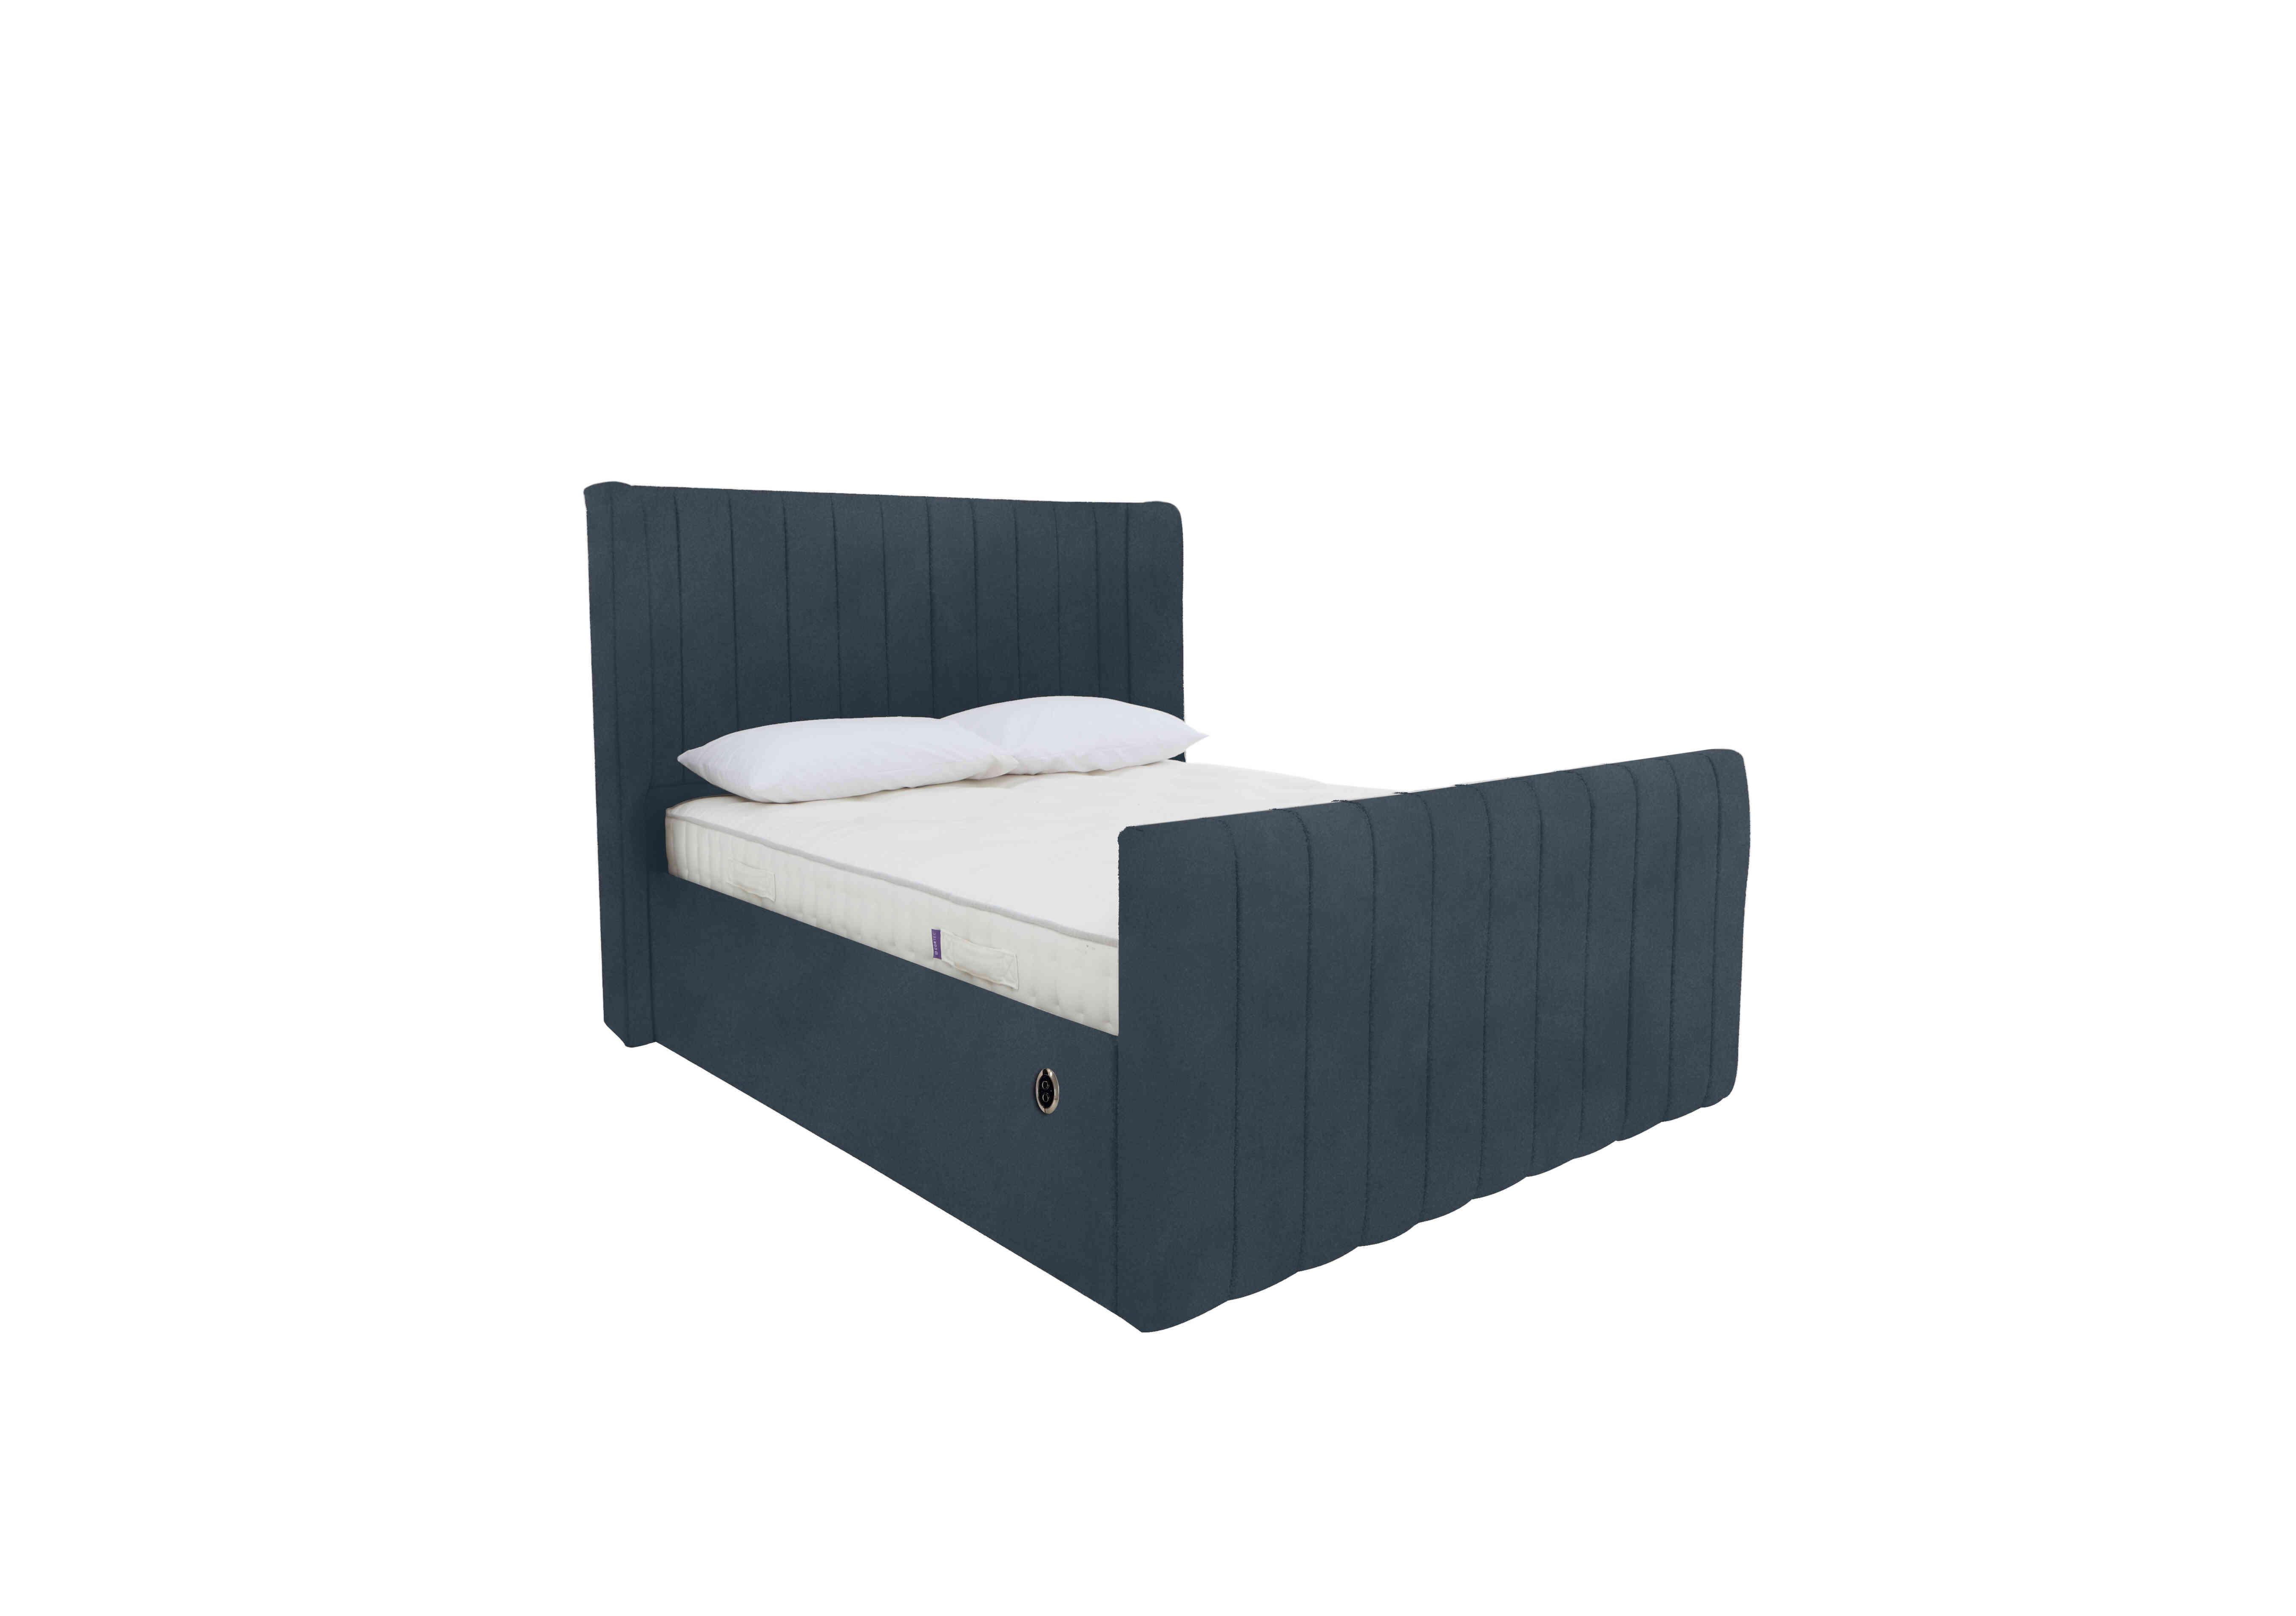 Eira High Foot End Electric Ottoman Bed Frame in Sanderson Safari on Furniture Village